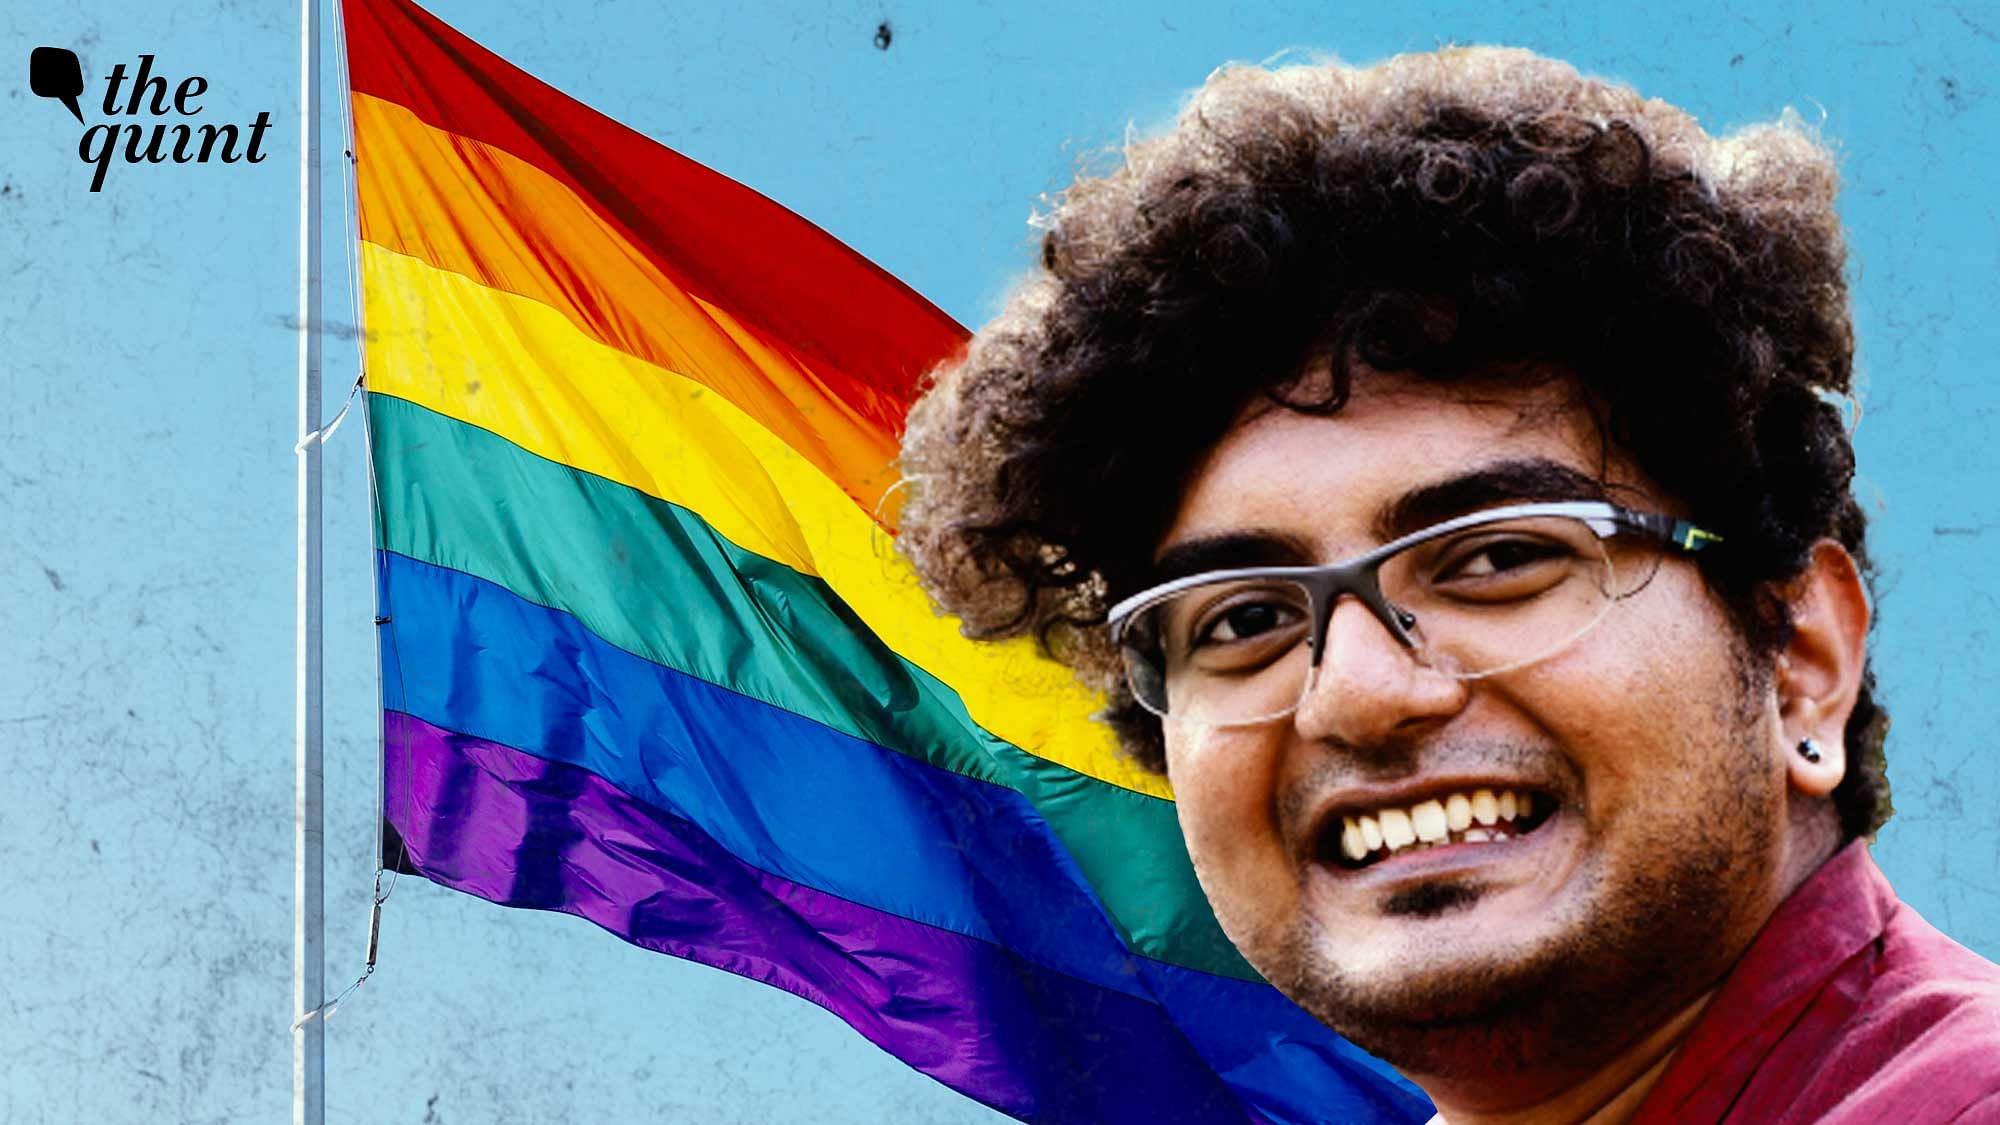 <div class="paragraphs"><p><a href="https://www.thequint.com/explainers/lgbt-queer-rights-india-section-377-homosexuality-history">LGBTQI+ activist</a> Gopi Shankar Madurai was brutally beaten up by a group of 6-7 persons near their home in Delhi's Karol Bagh on Saturday, 11 November.</p></div>